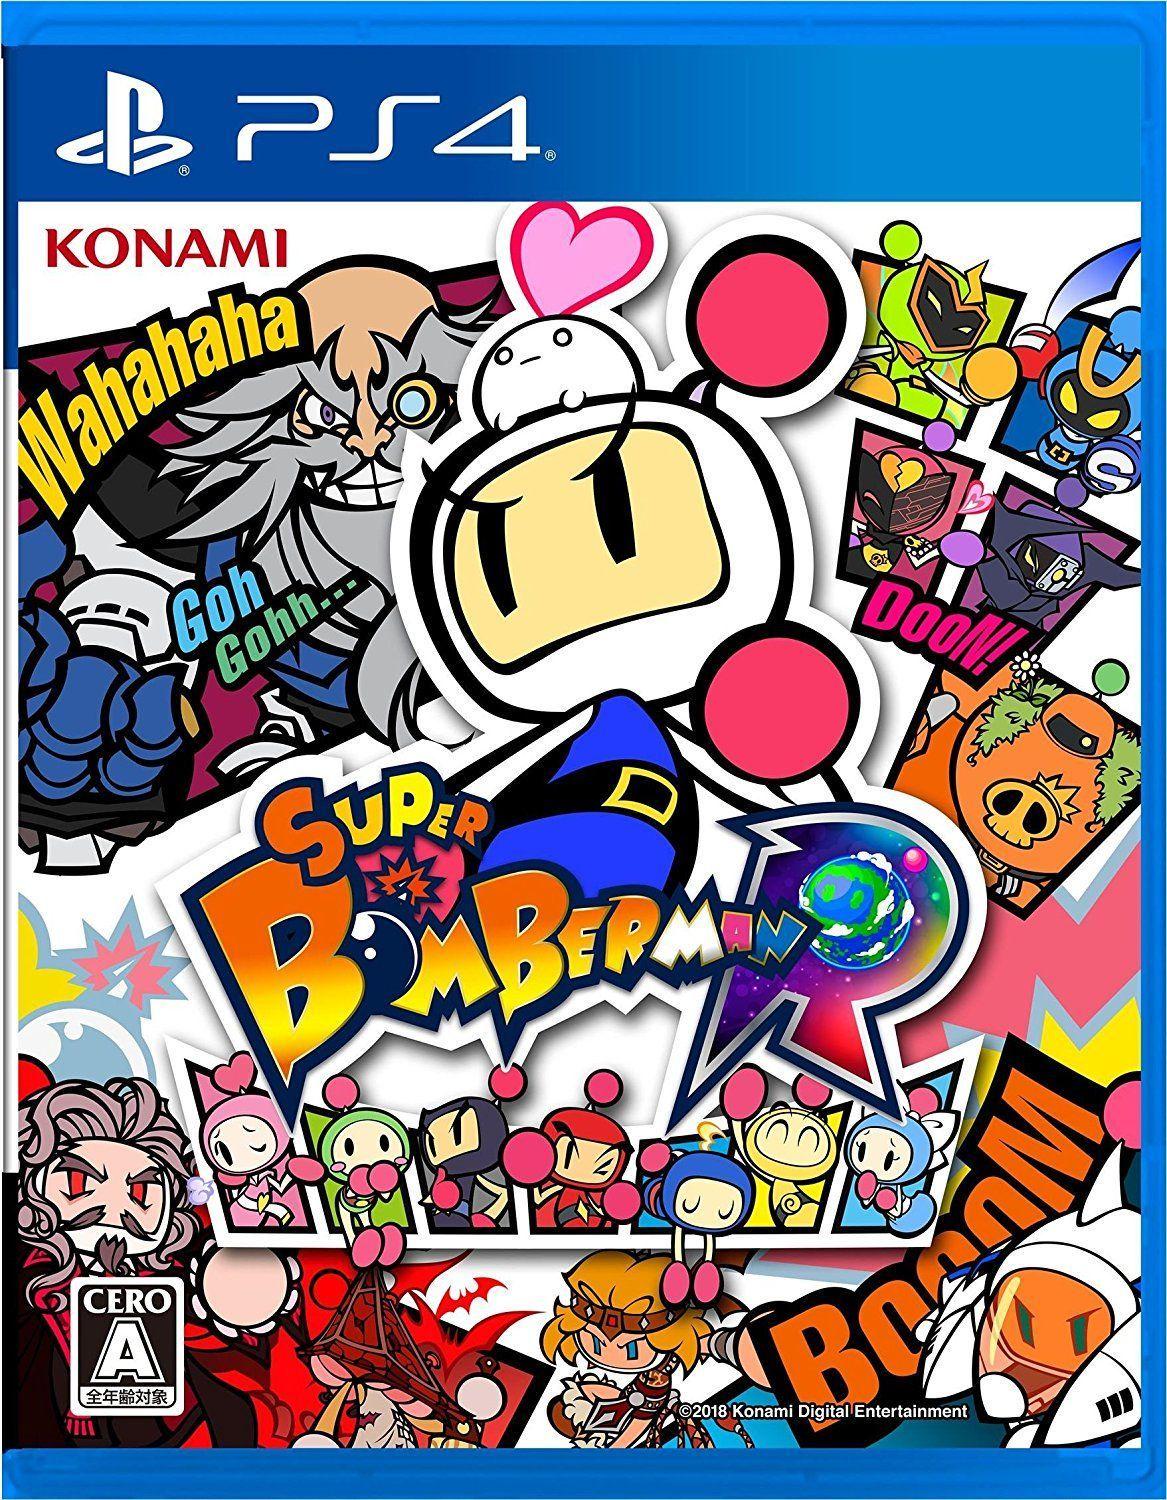 Boxart for Super Bomberman R on PS4 #Playstation4 #PS4 #Sony